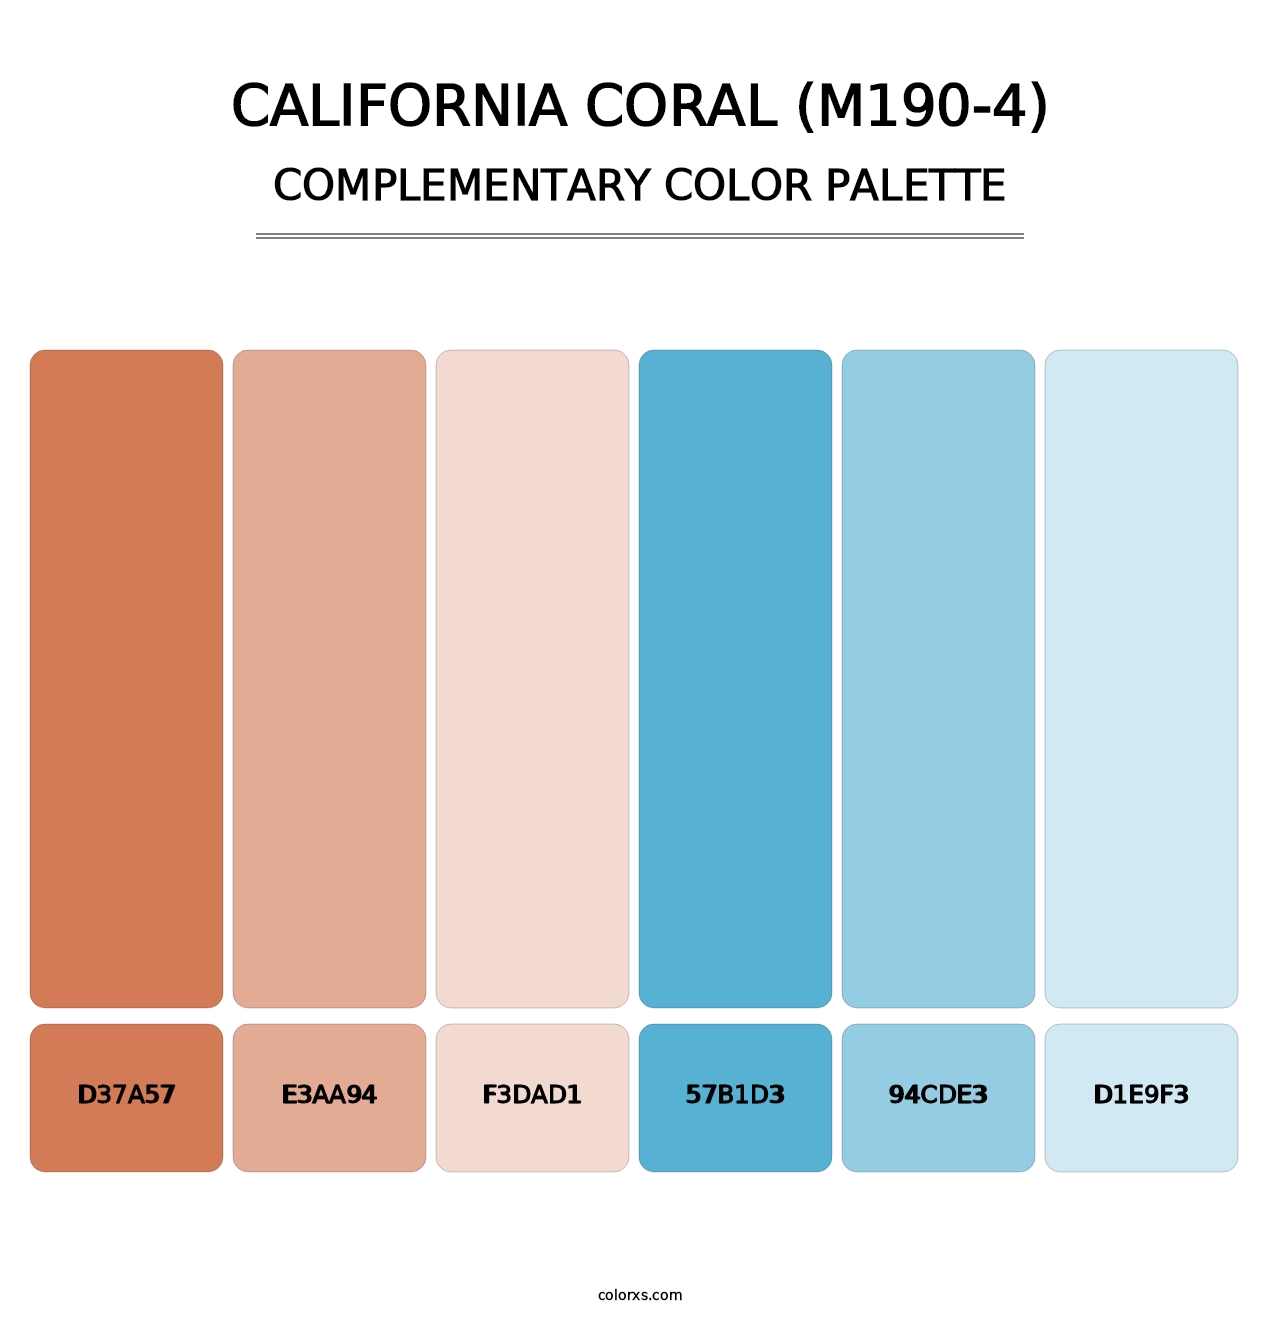 California Coral (M190-4) - Complementary Color Palette